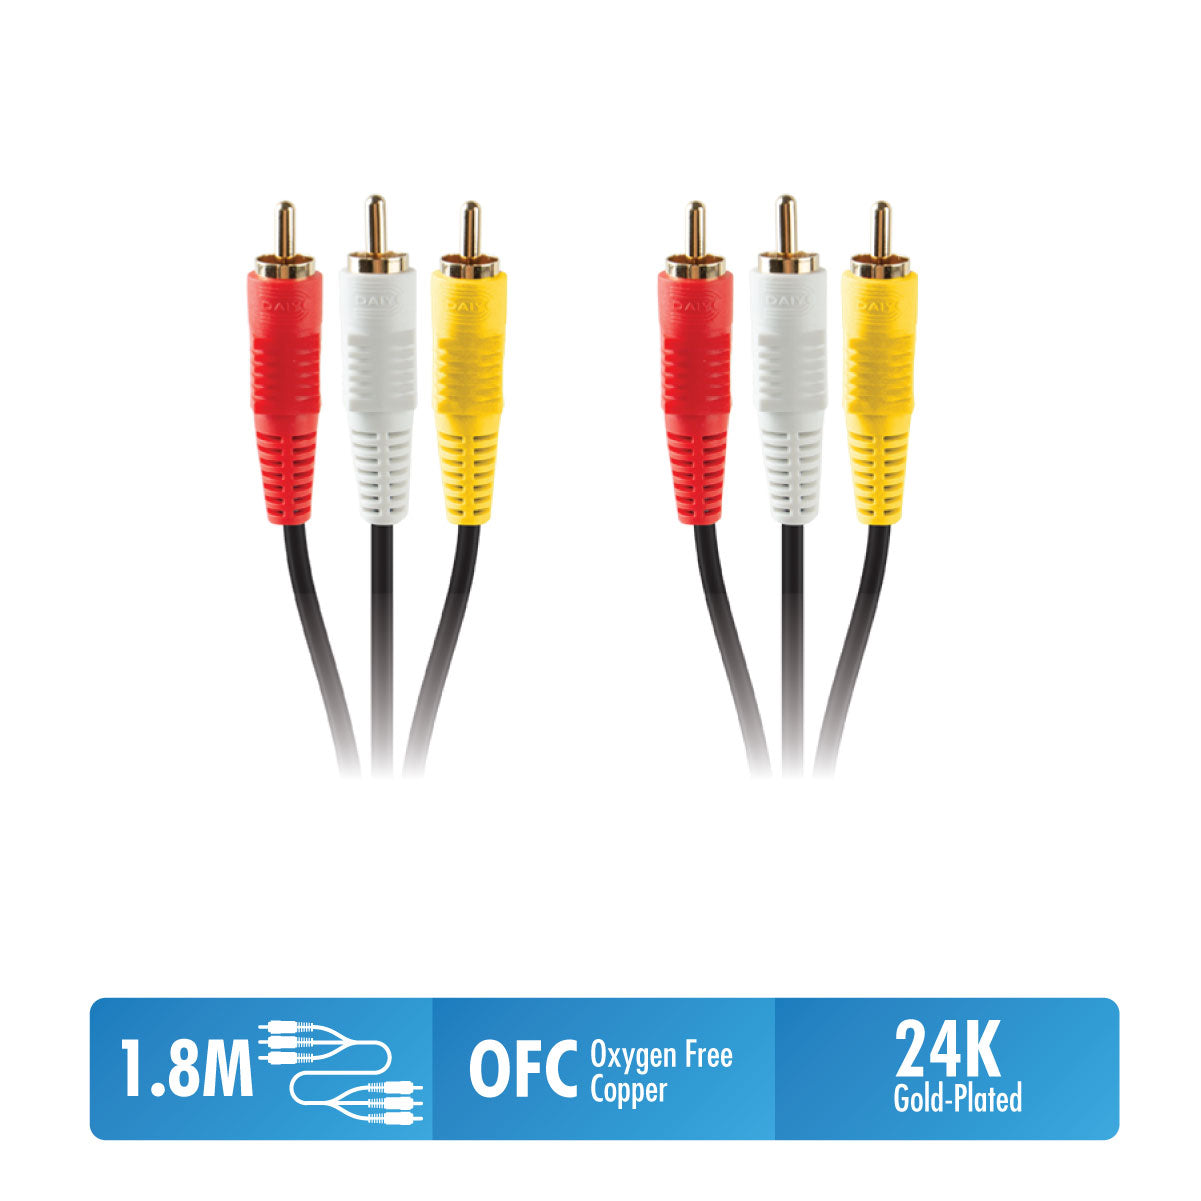 Daiyo TA 8585 Video 3 RCA Cable Red, White and Yellow Gold Connector 1.8m